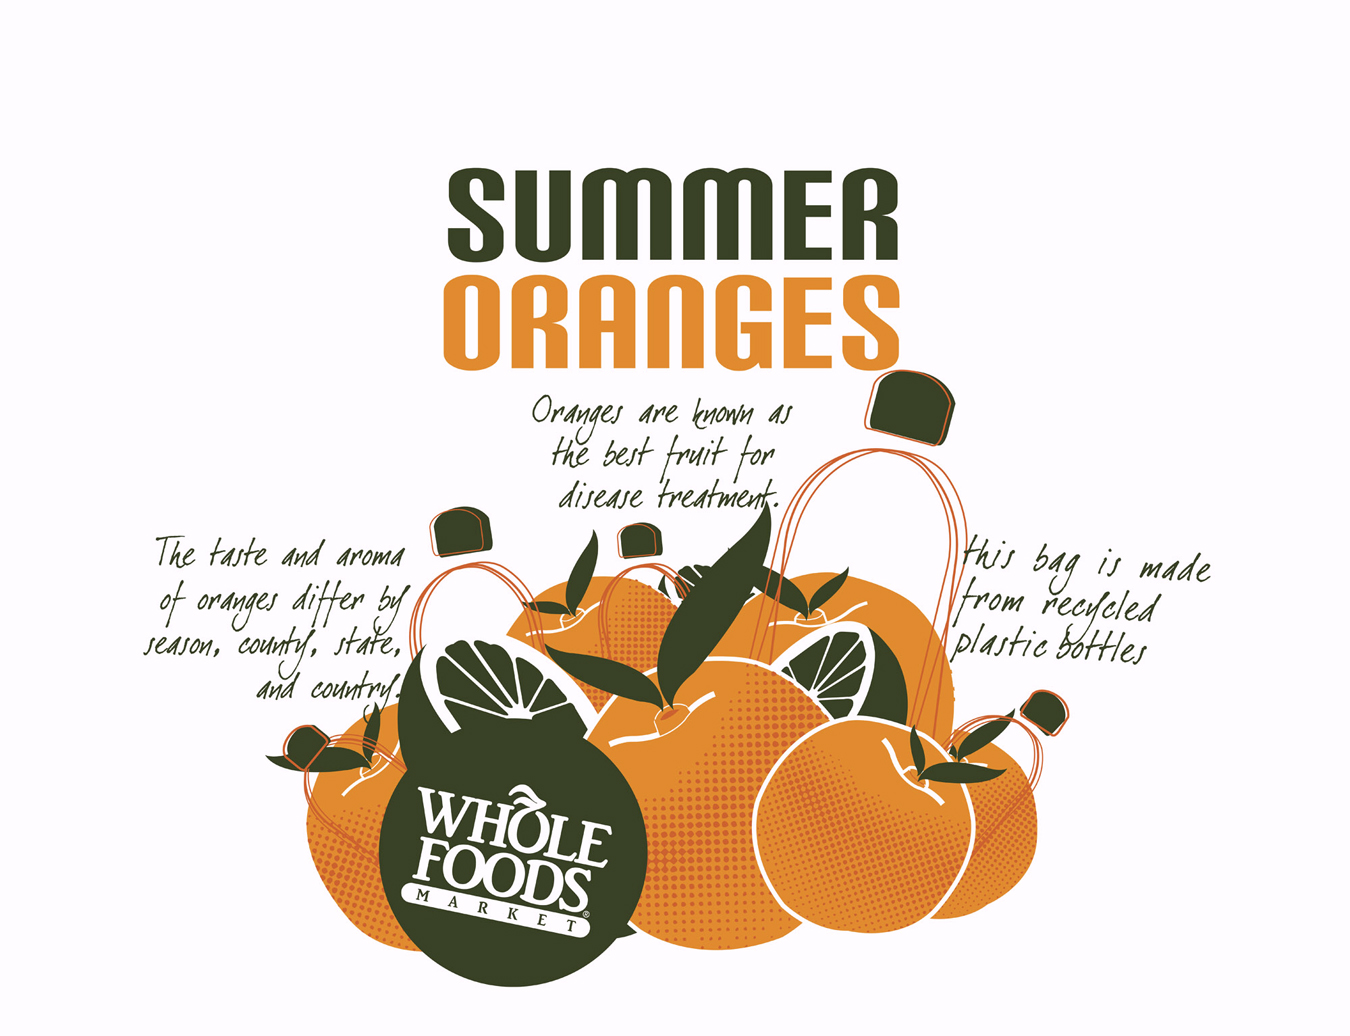 Whole Foods: “In Season” Design Proposals